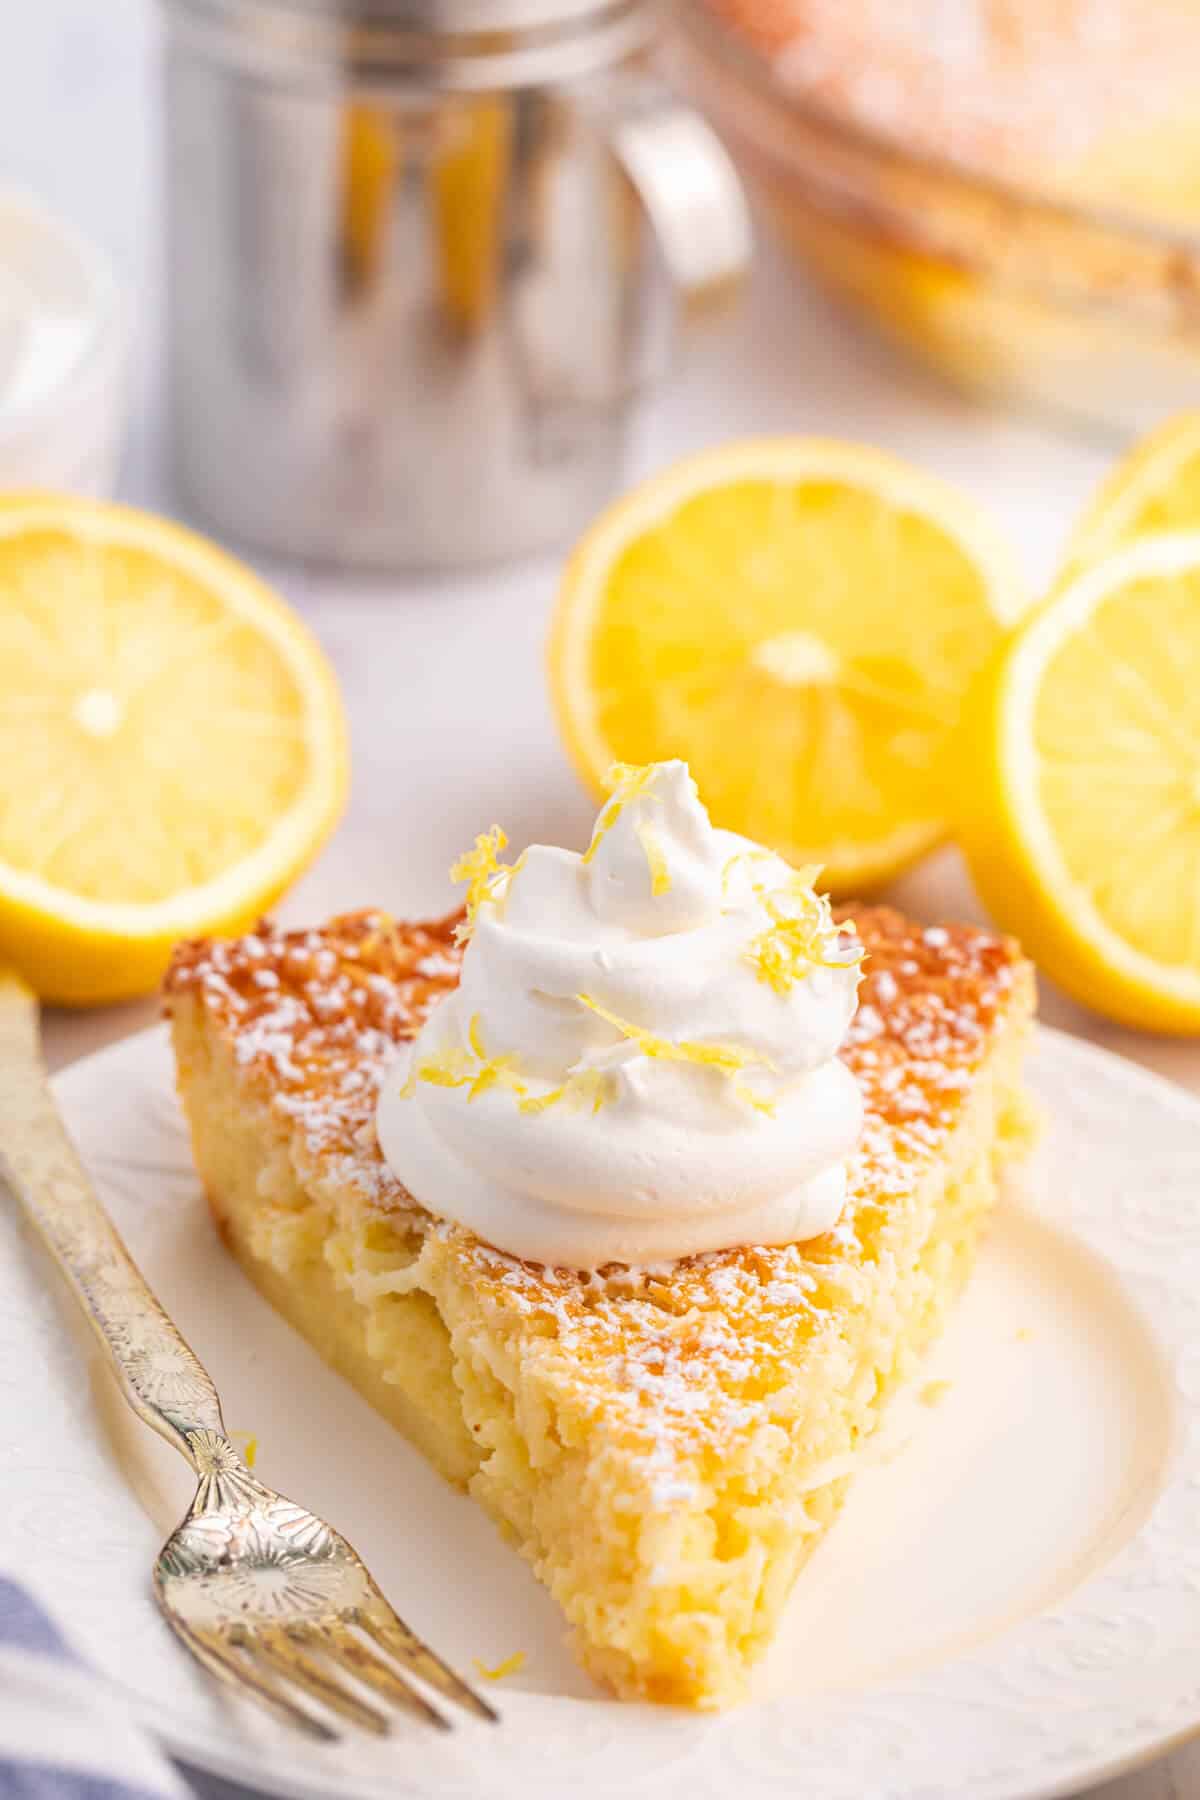 A slice of lemon impossible pie on a plate with a fork.